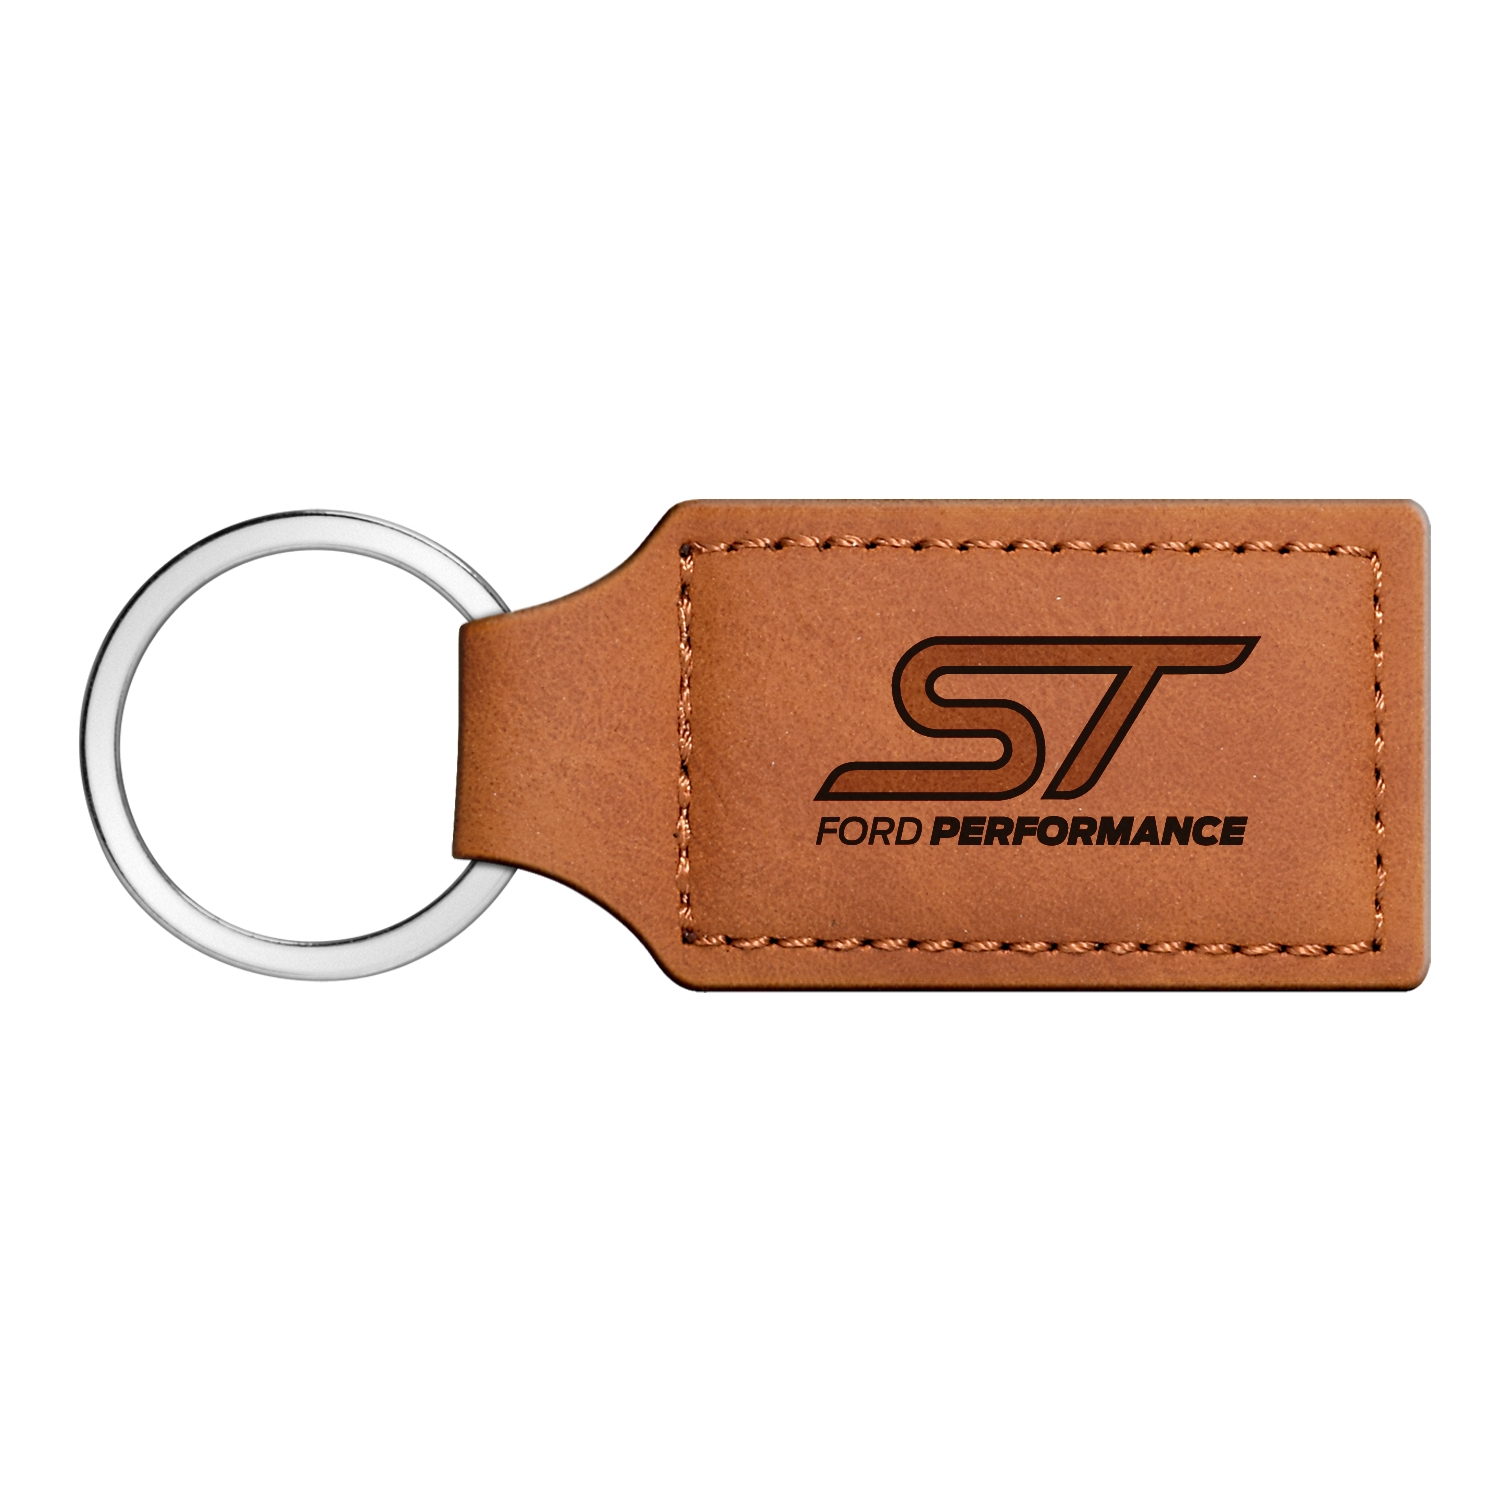 Ford Focus ST Rectangular Brown Leather Key Chain